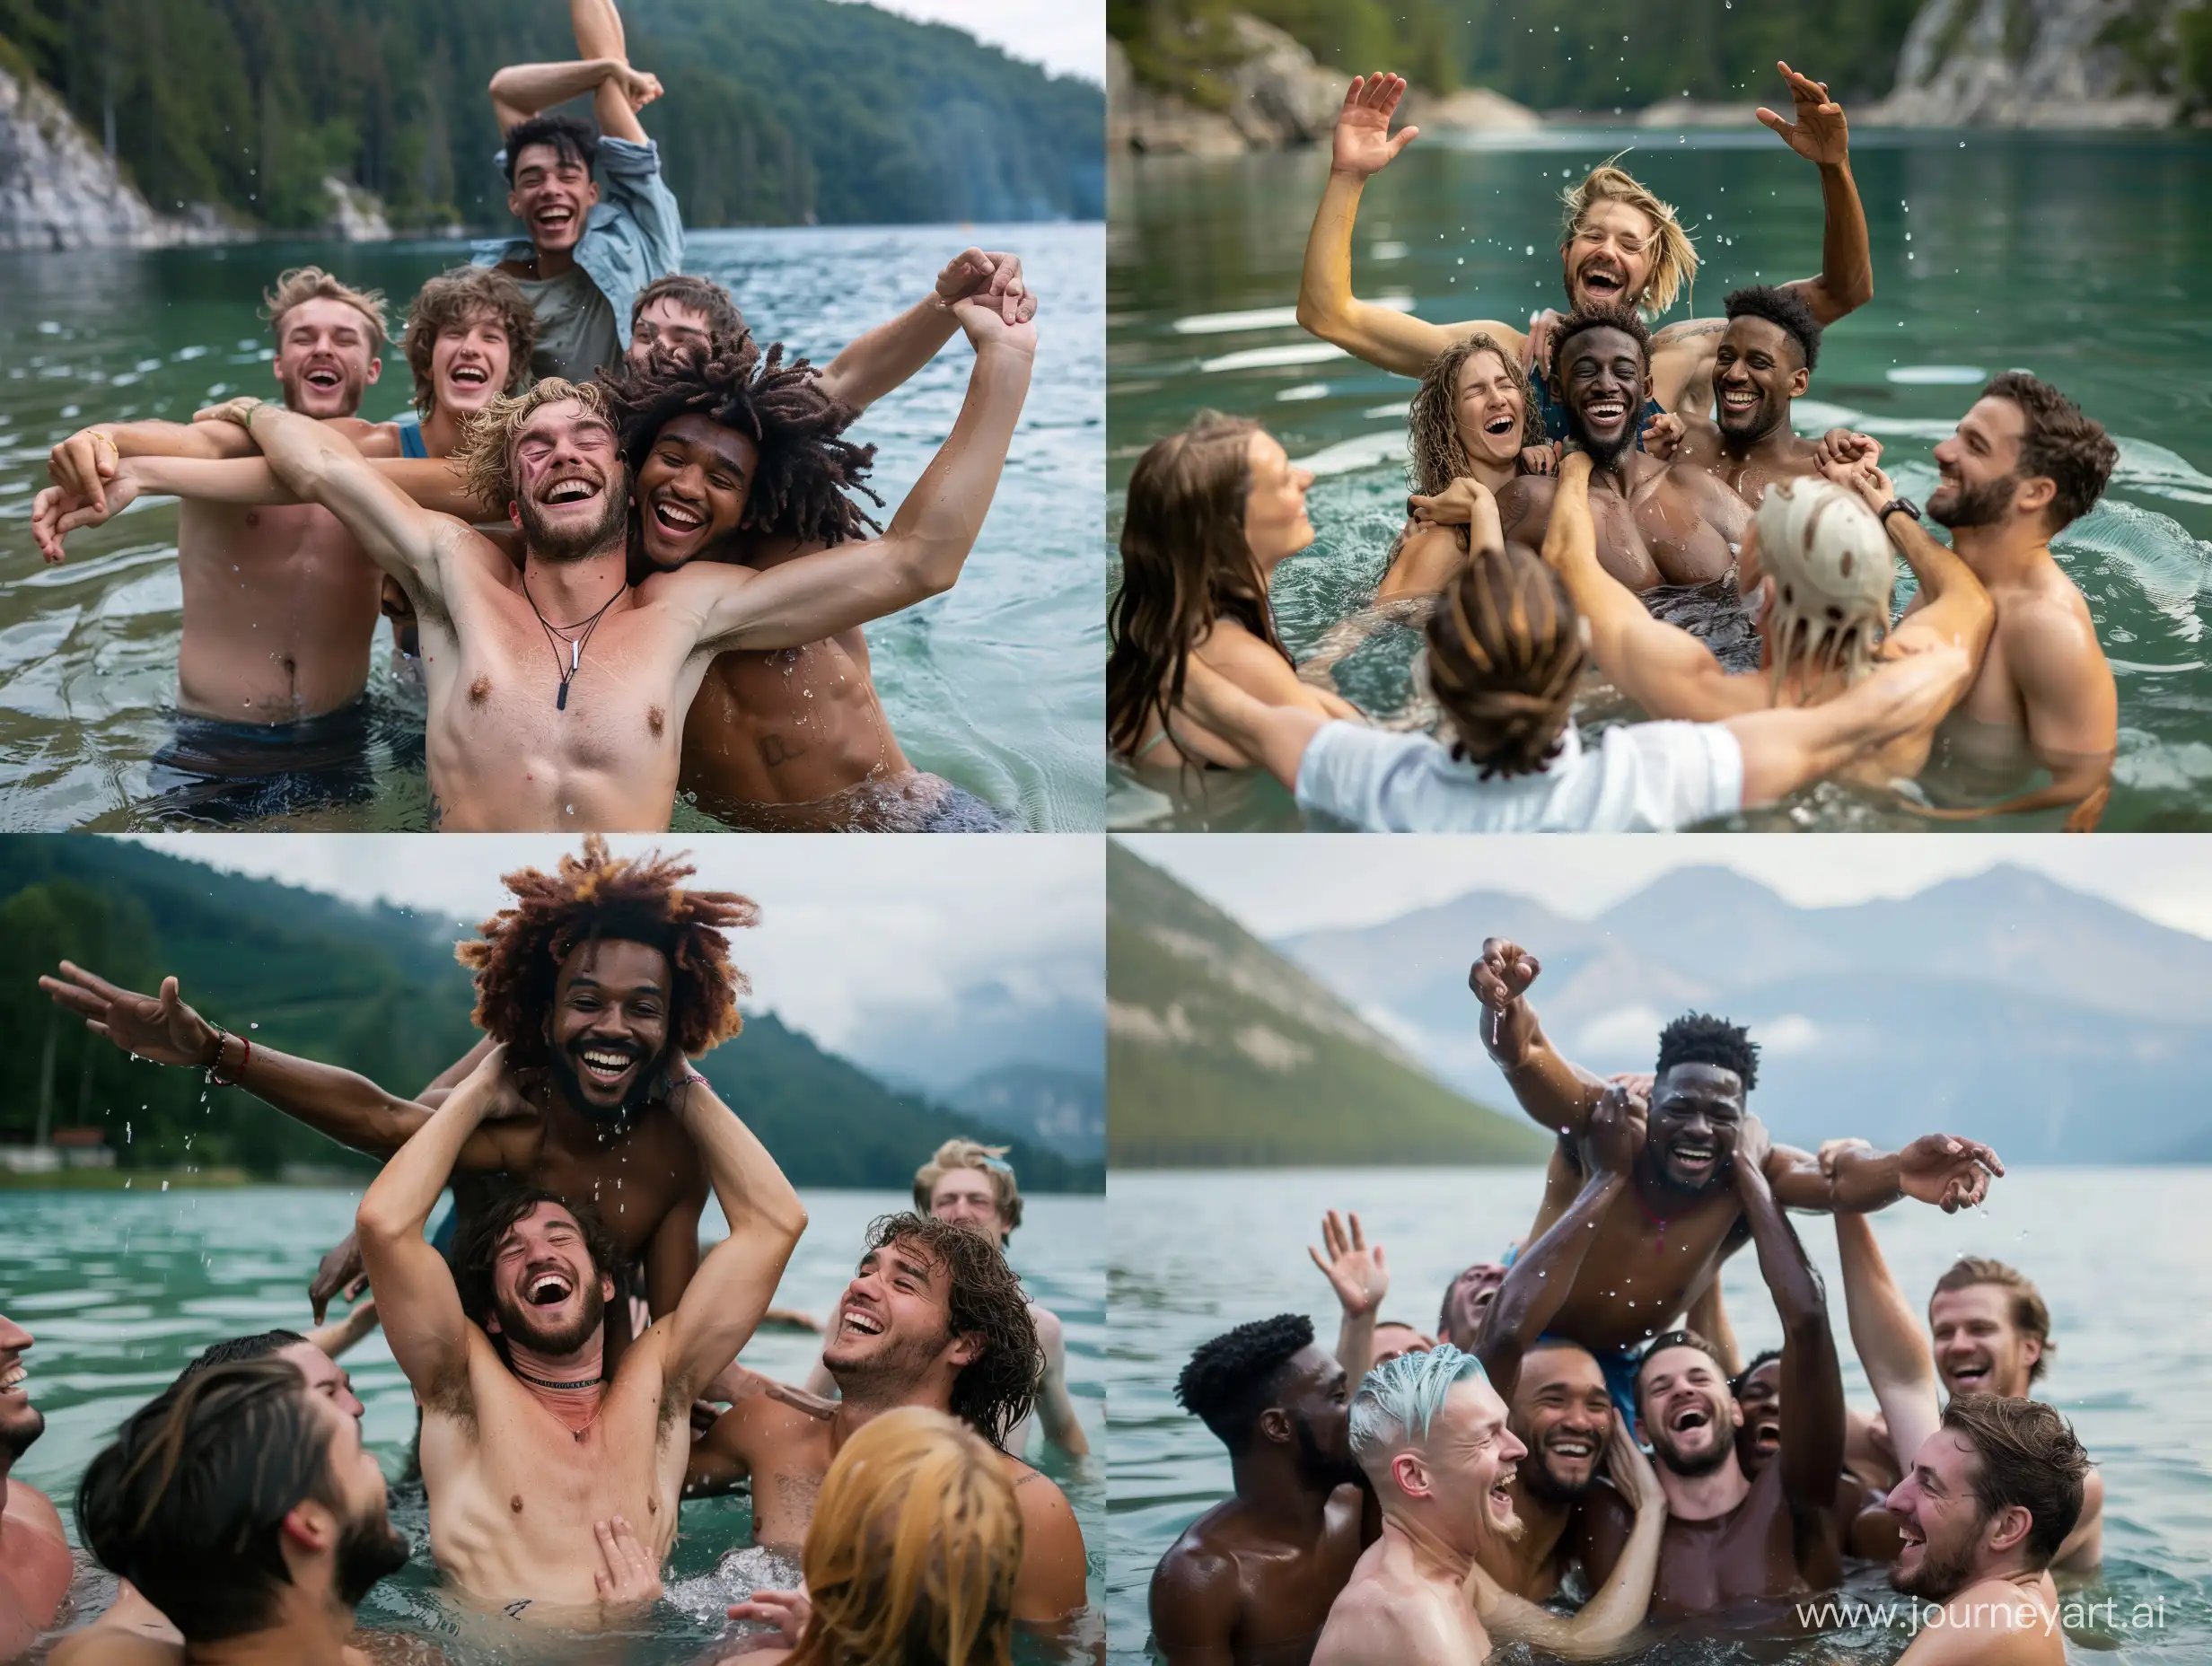 Joyful-Lakeside-Adventure-Young-Adults-Lift-Friend-in-Funfilled-Vacation-Moment